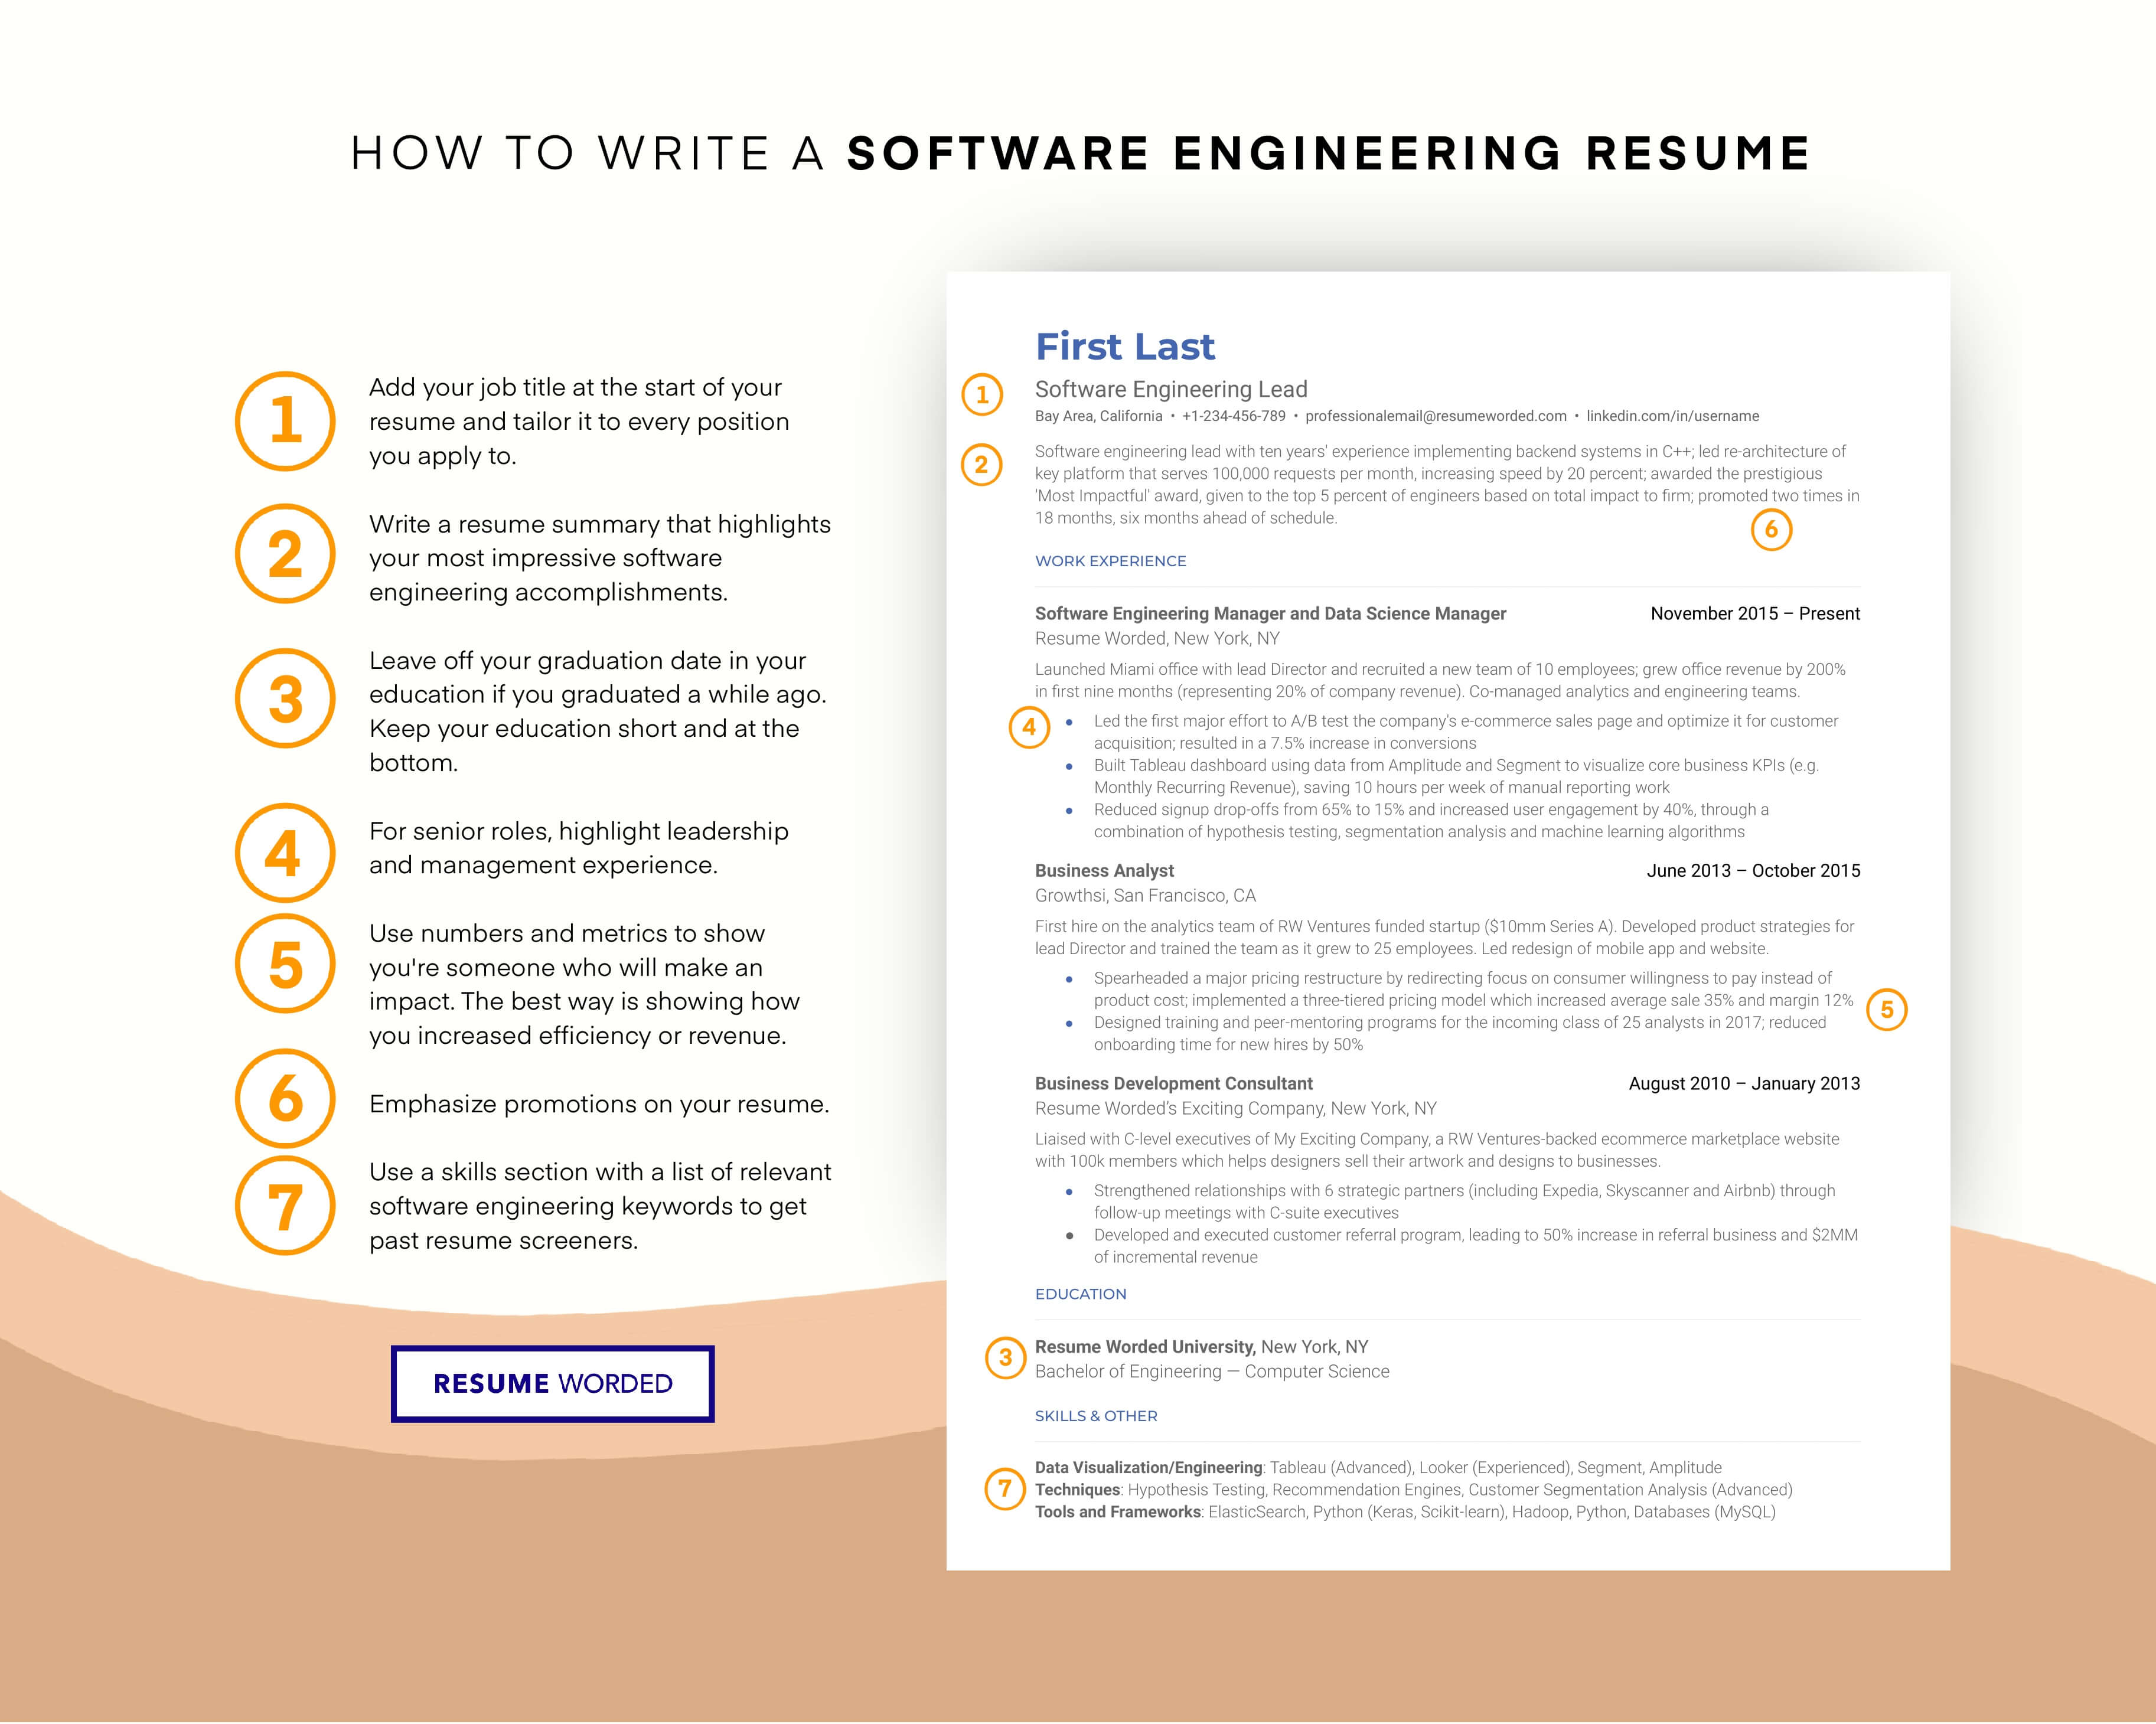 Detail your software development projects and quantify their success - Full Stack Developer Resume